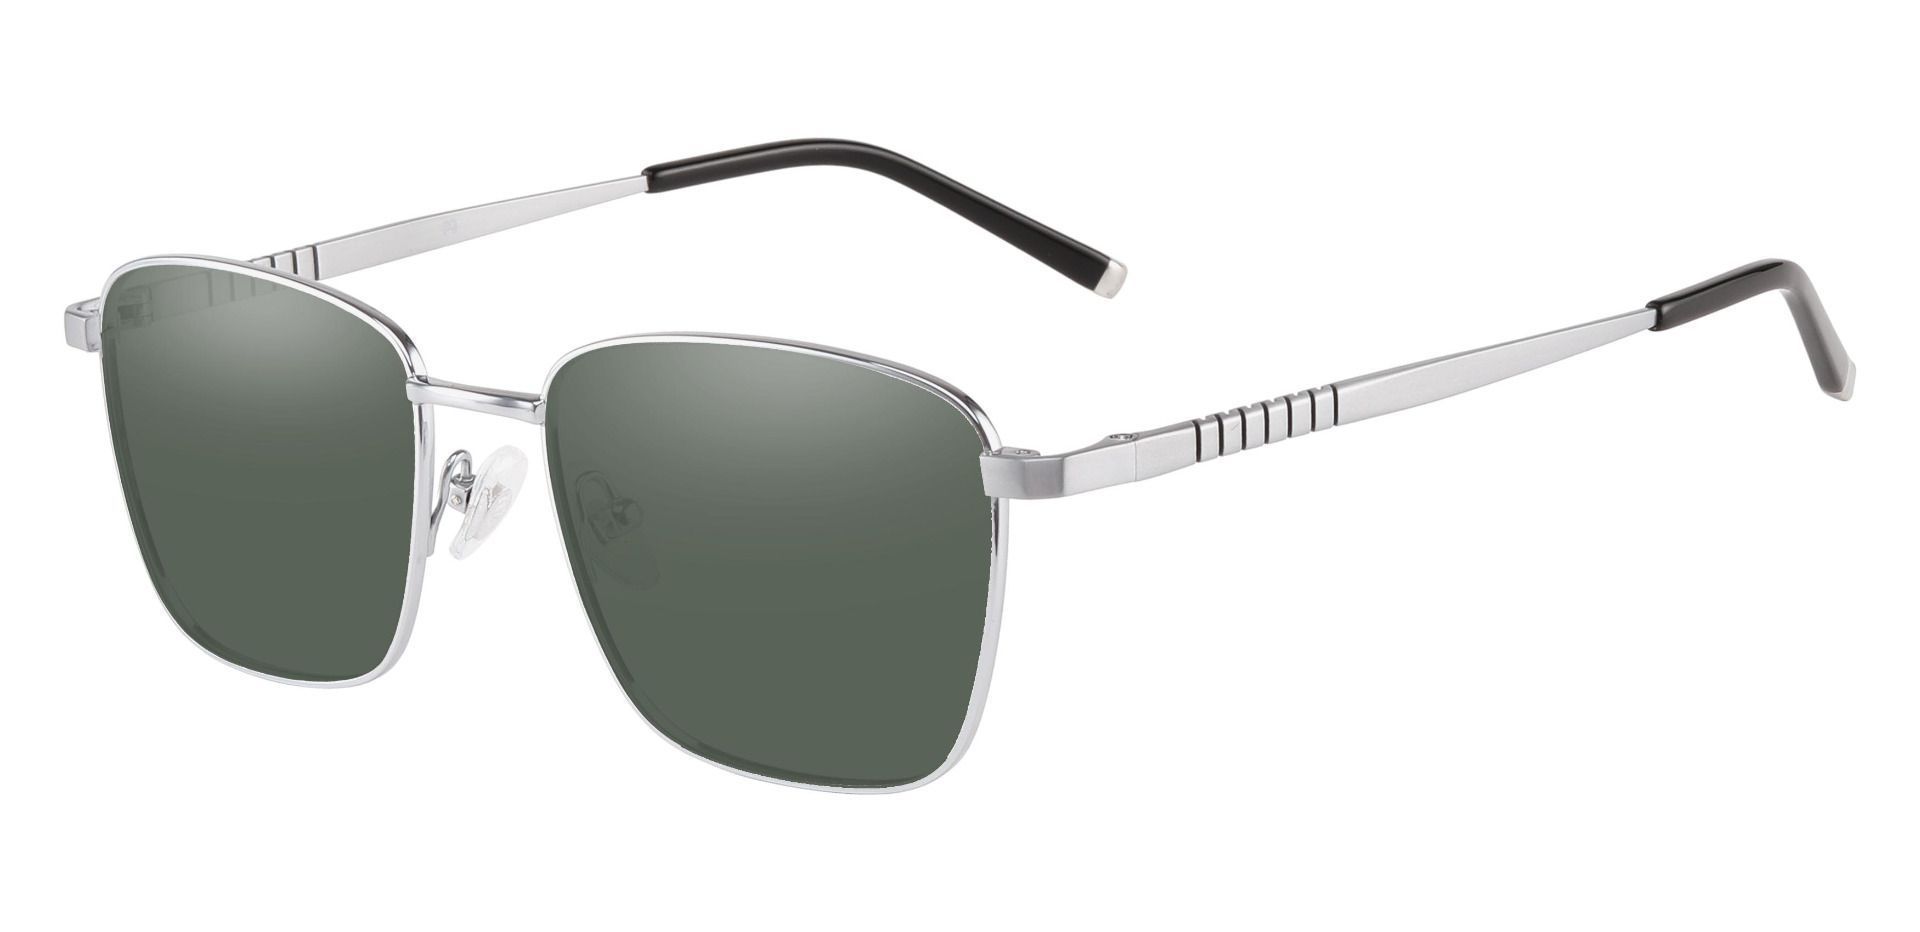 May Square Prescription Sunglasses - Silver Frame With Green Lenses